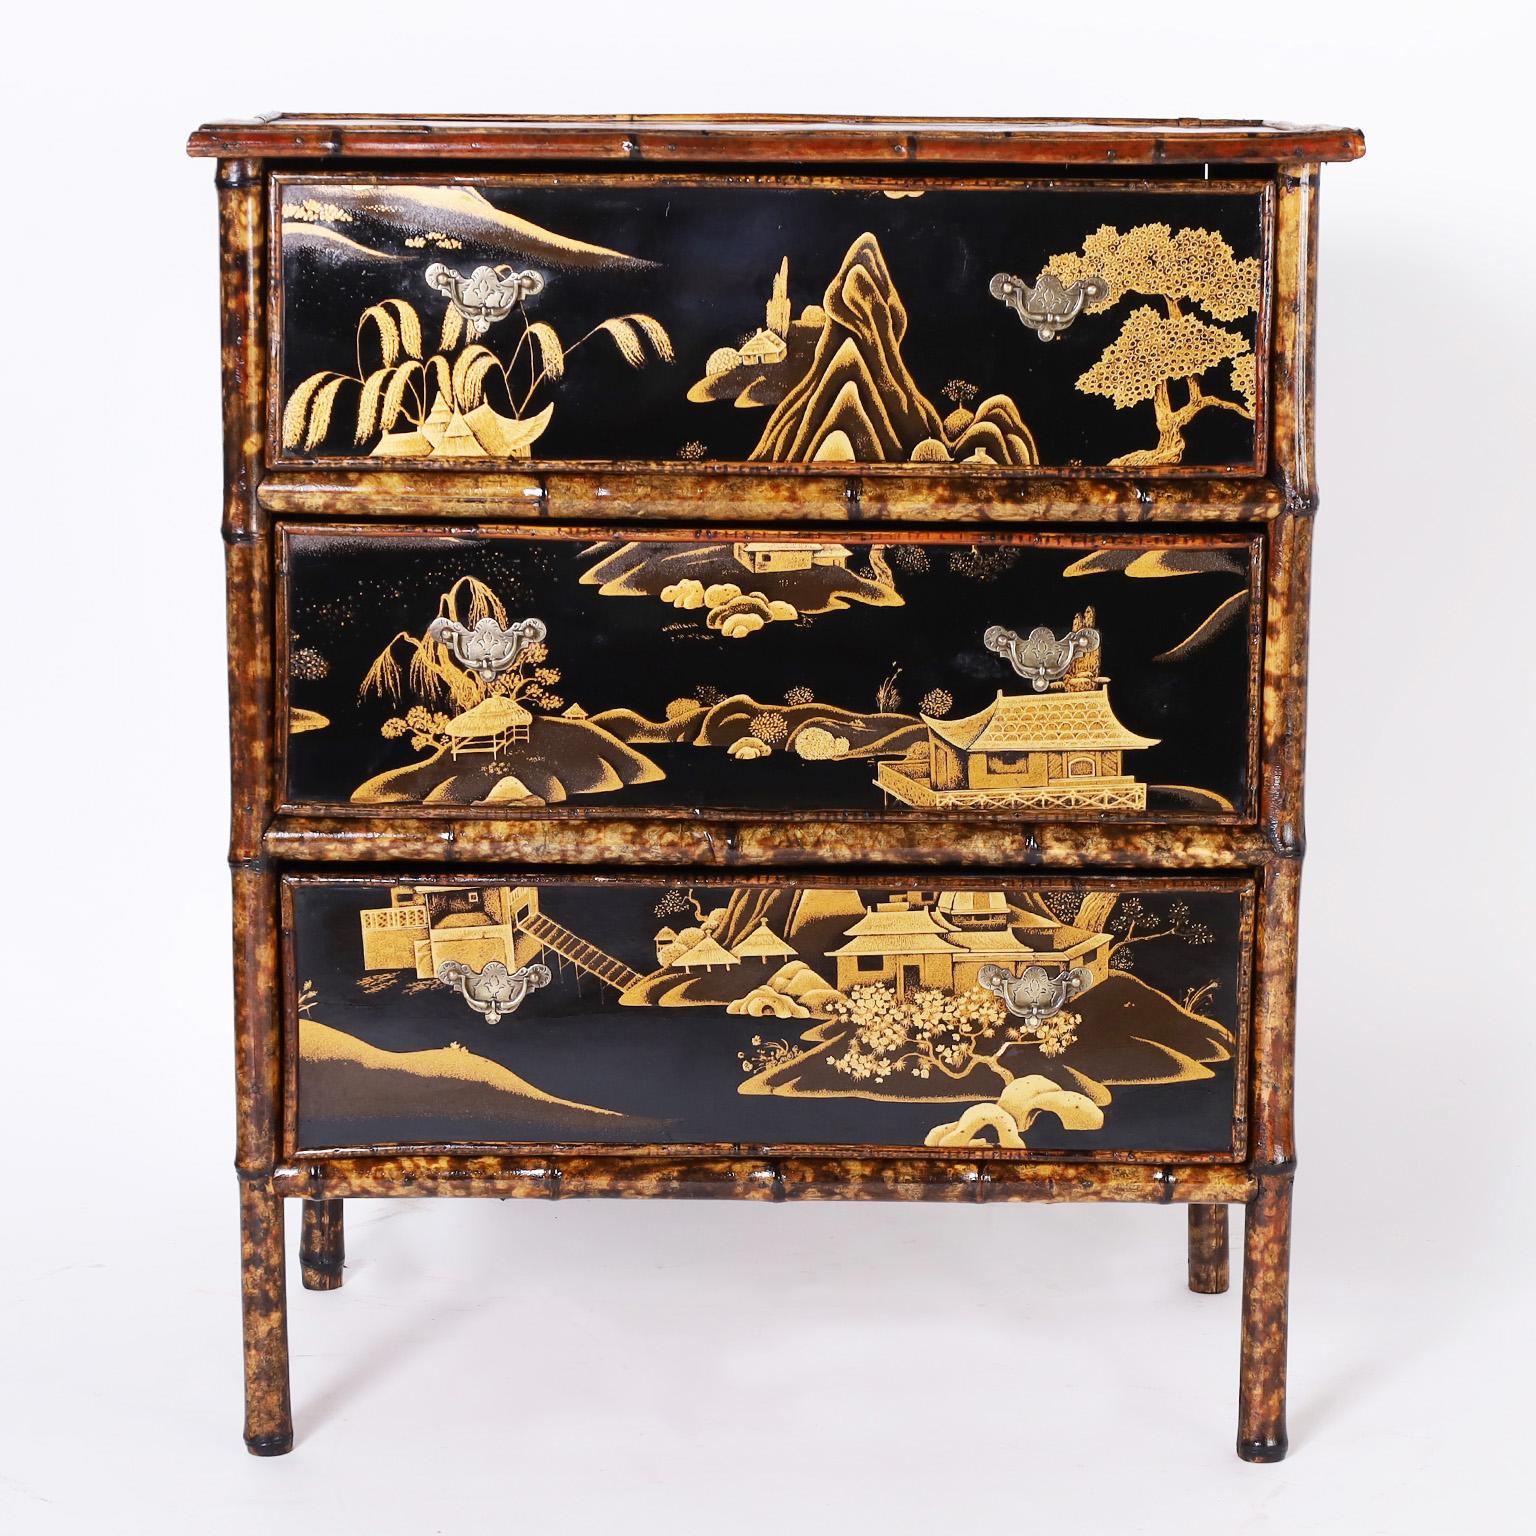 Impressive 19th century English three drawer chest with a bamboo frame and decorated in classic chinoiserie scenes of houses, trees, and mountains in a lacquer technique. Best of the genre.